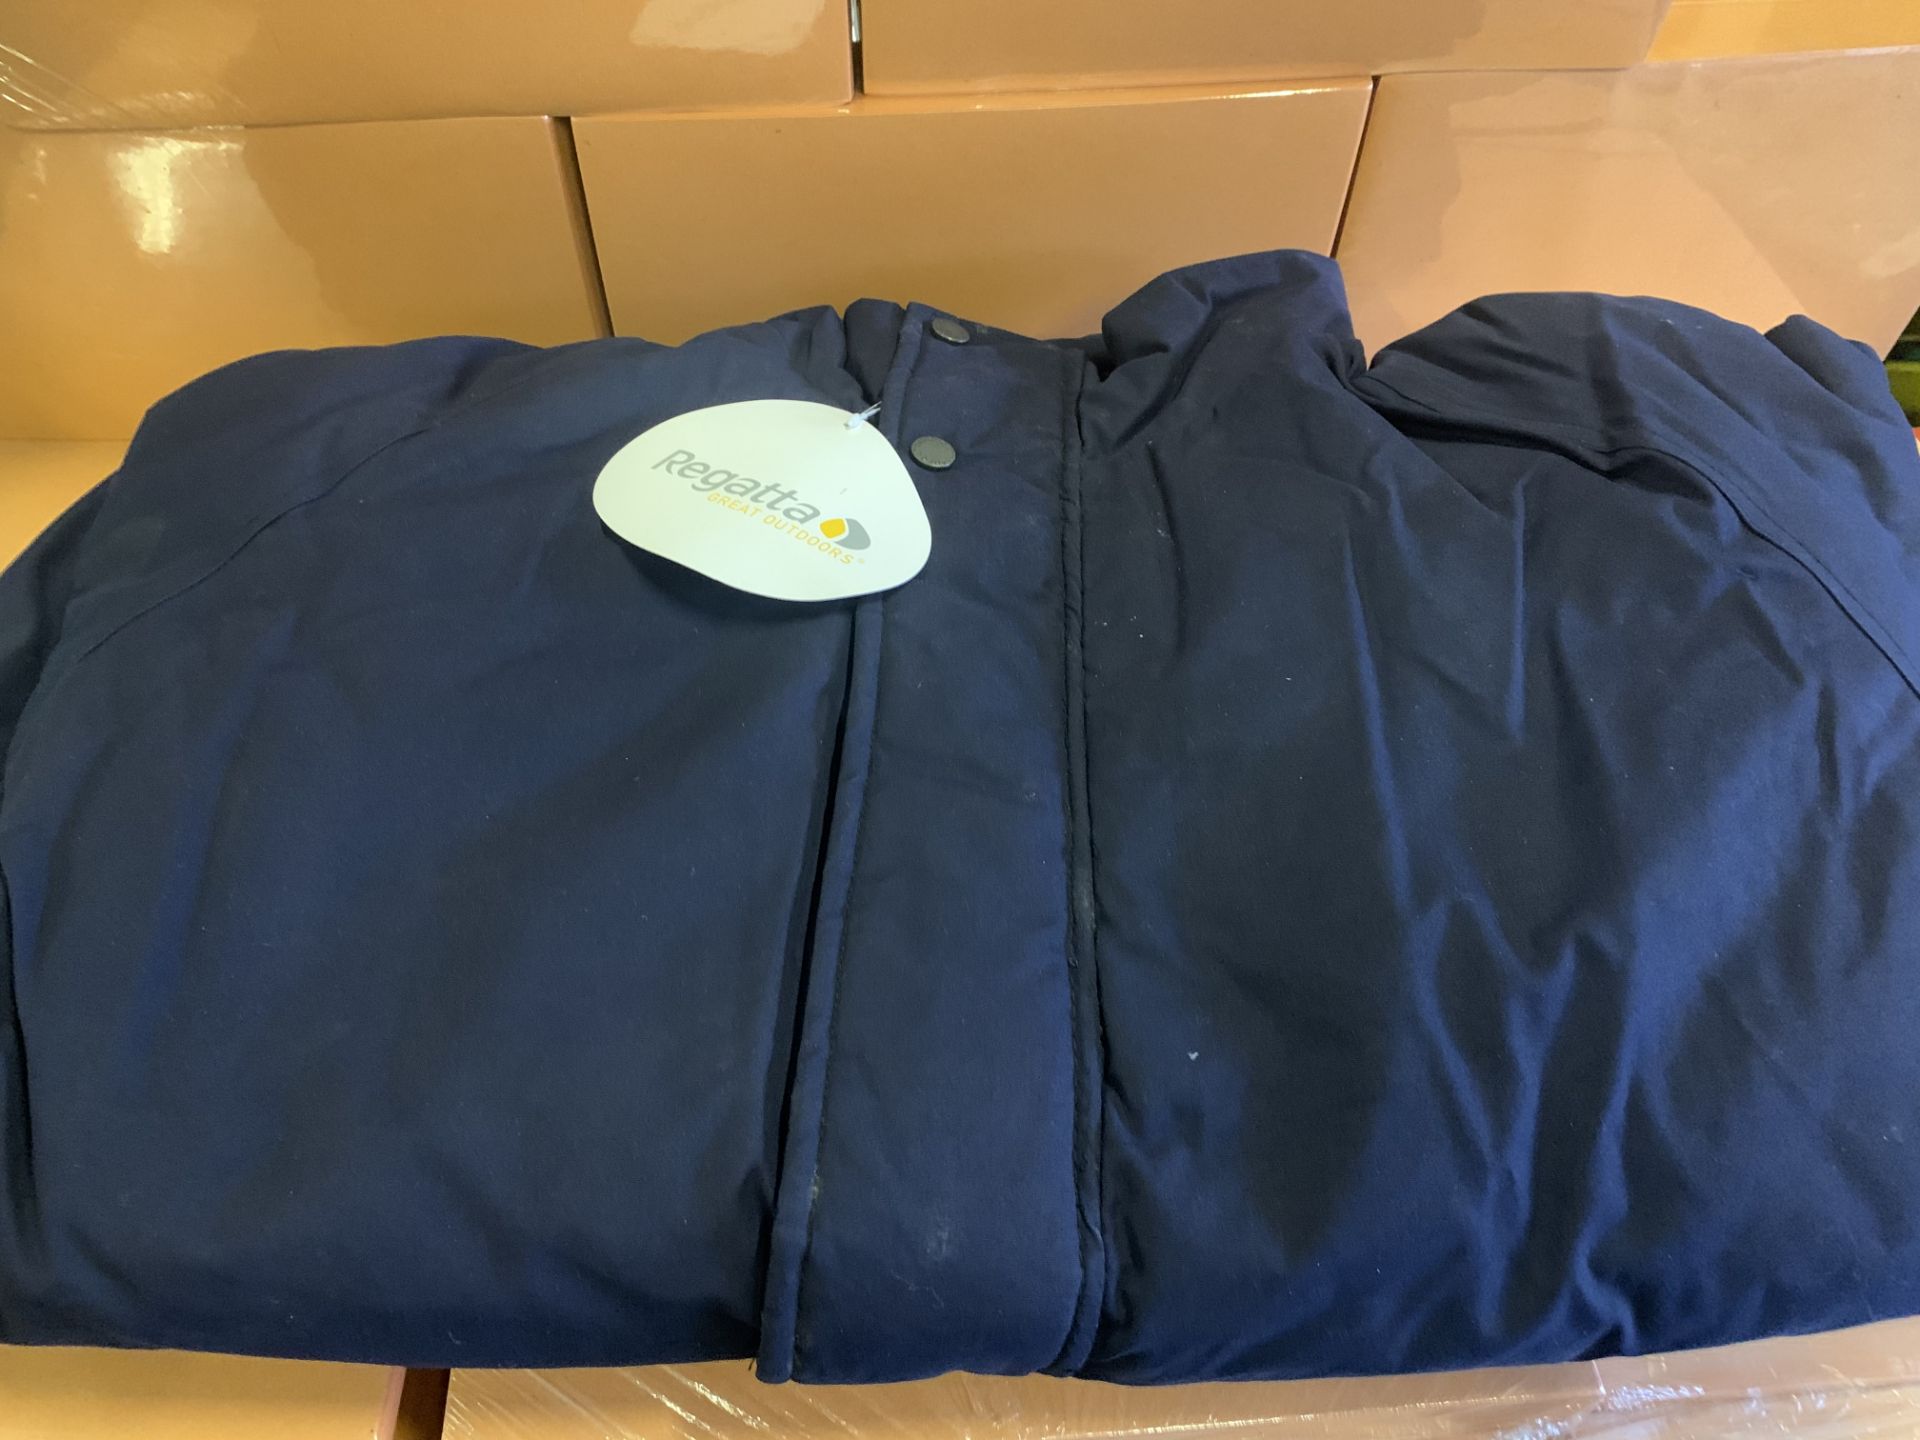 6 X BRAND NEW REGATTA WORK JACKETS IN VARIOUS COLOURS AND SIZES